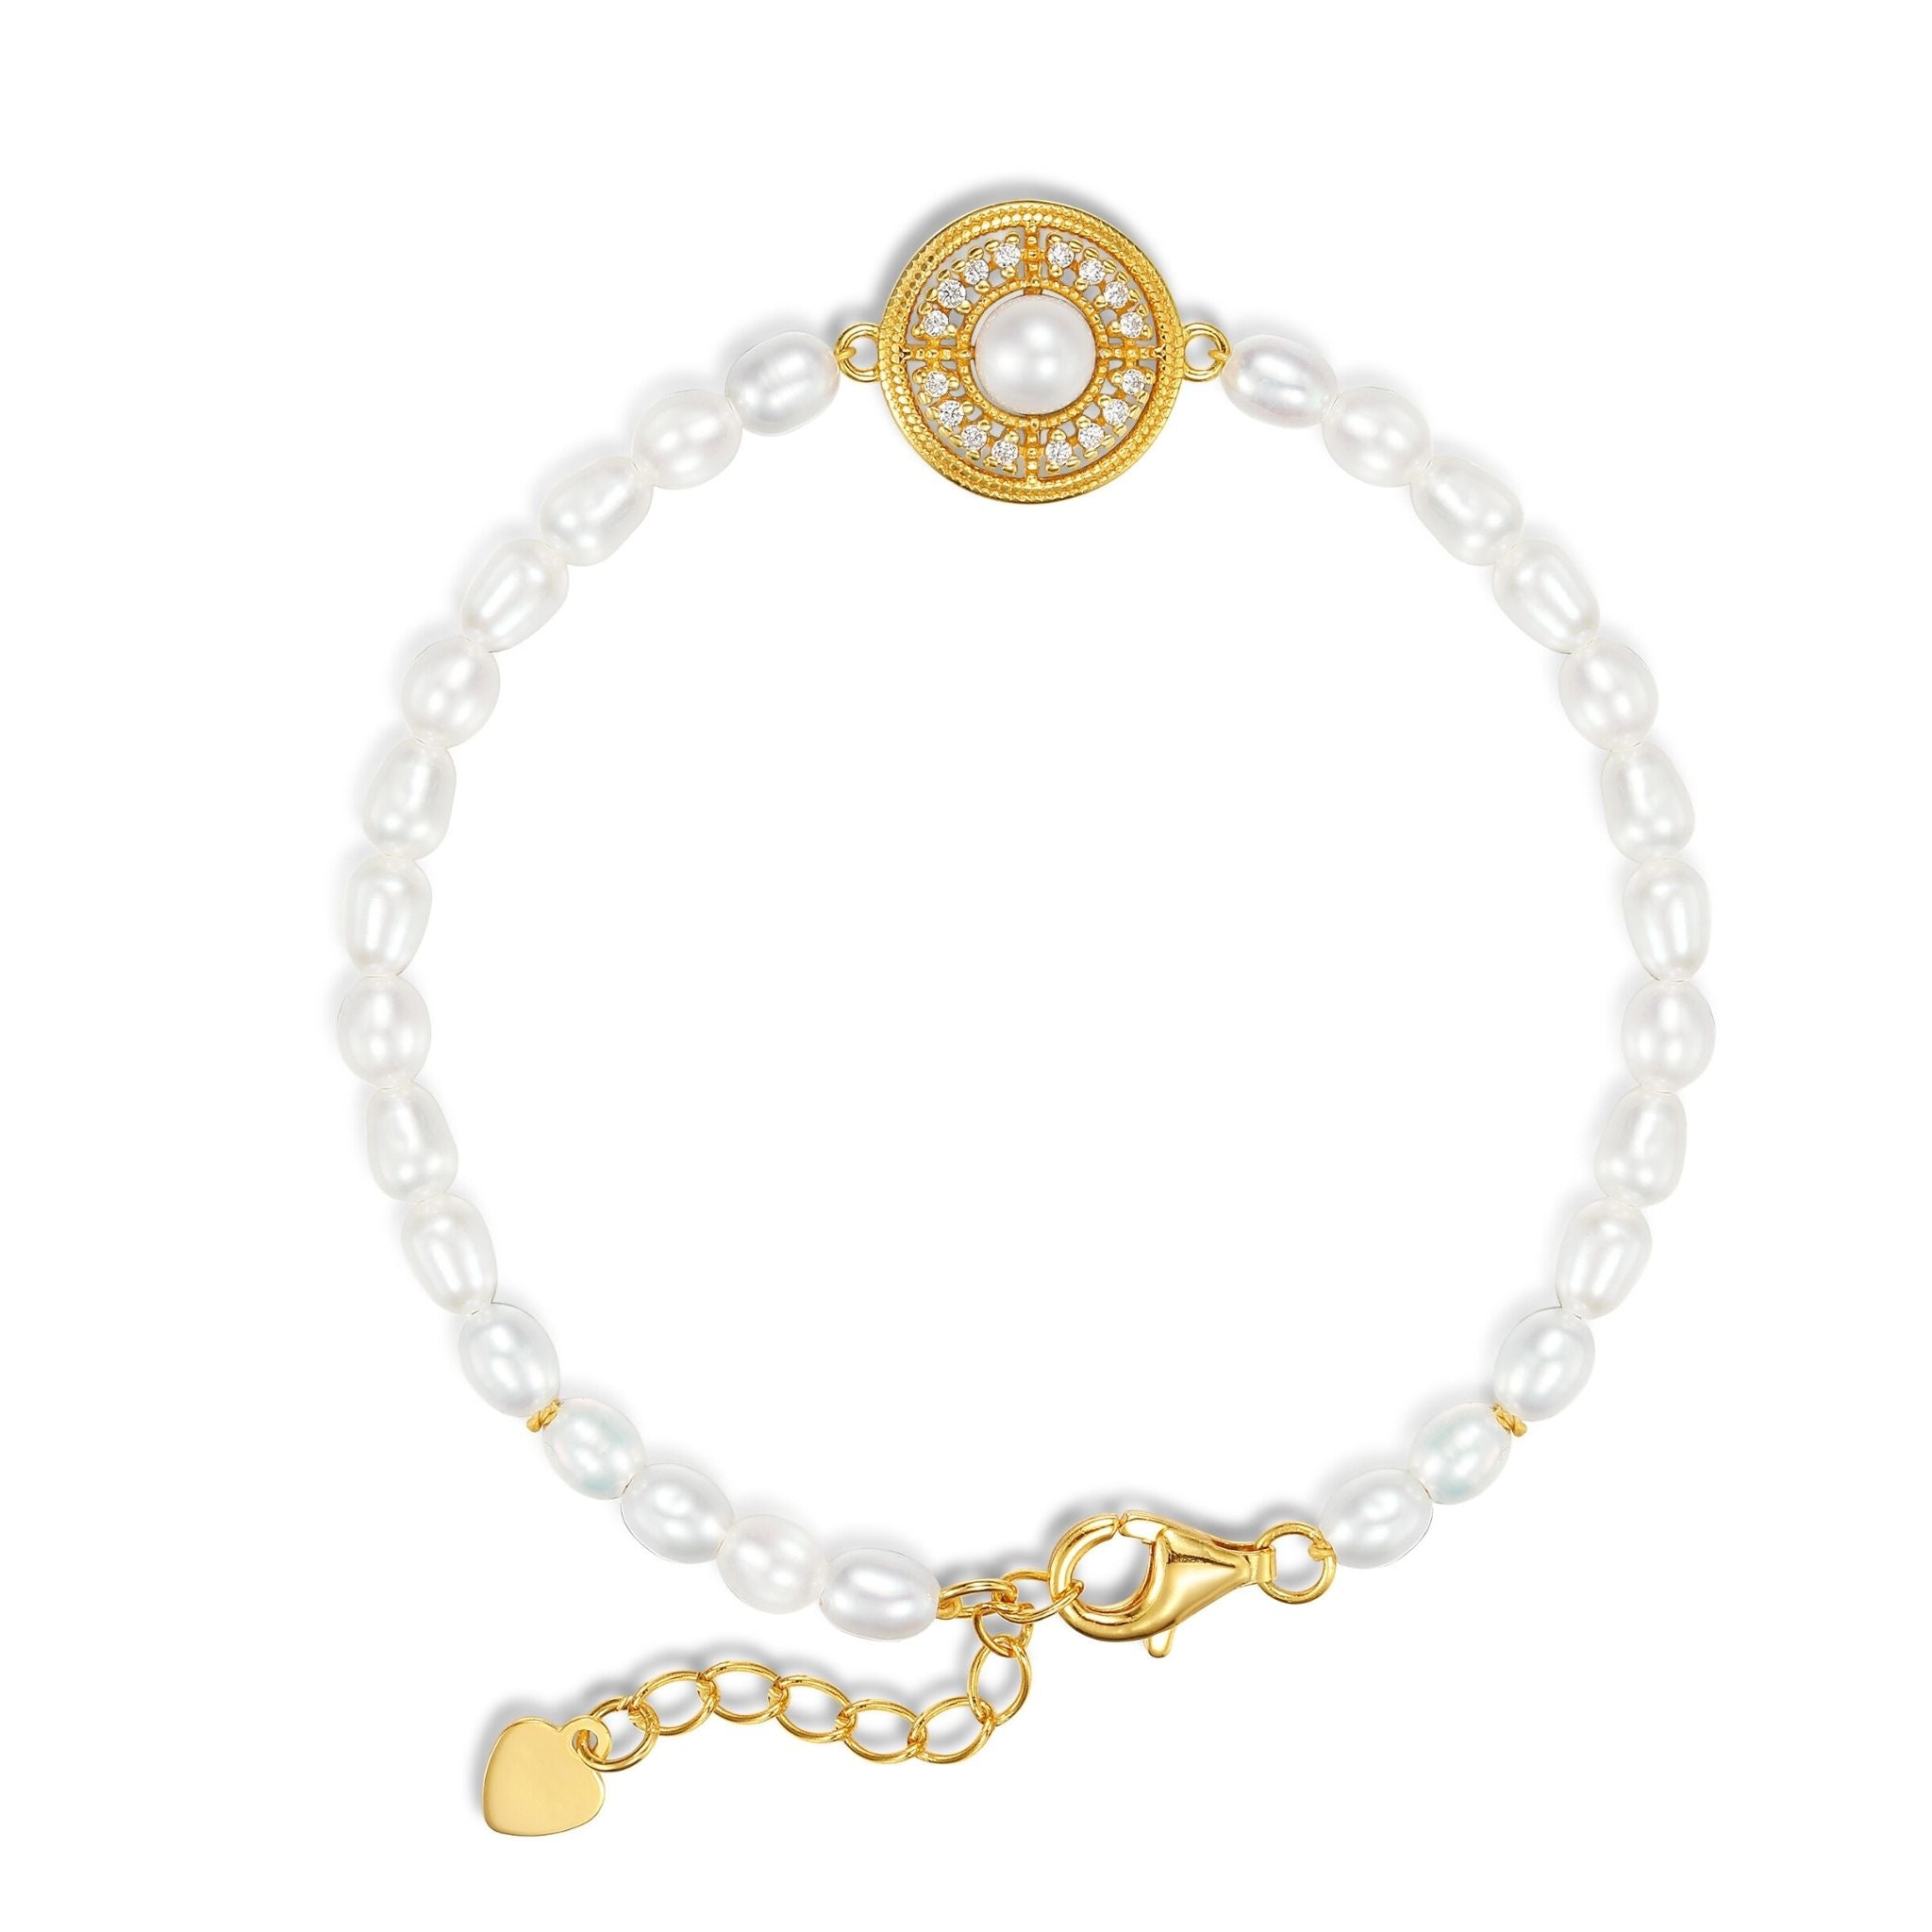 Golden Halo Freshwater Pearl Bracelet - L'Amour Pearls